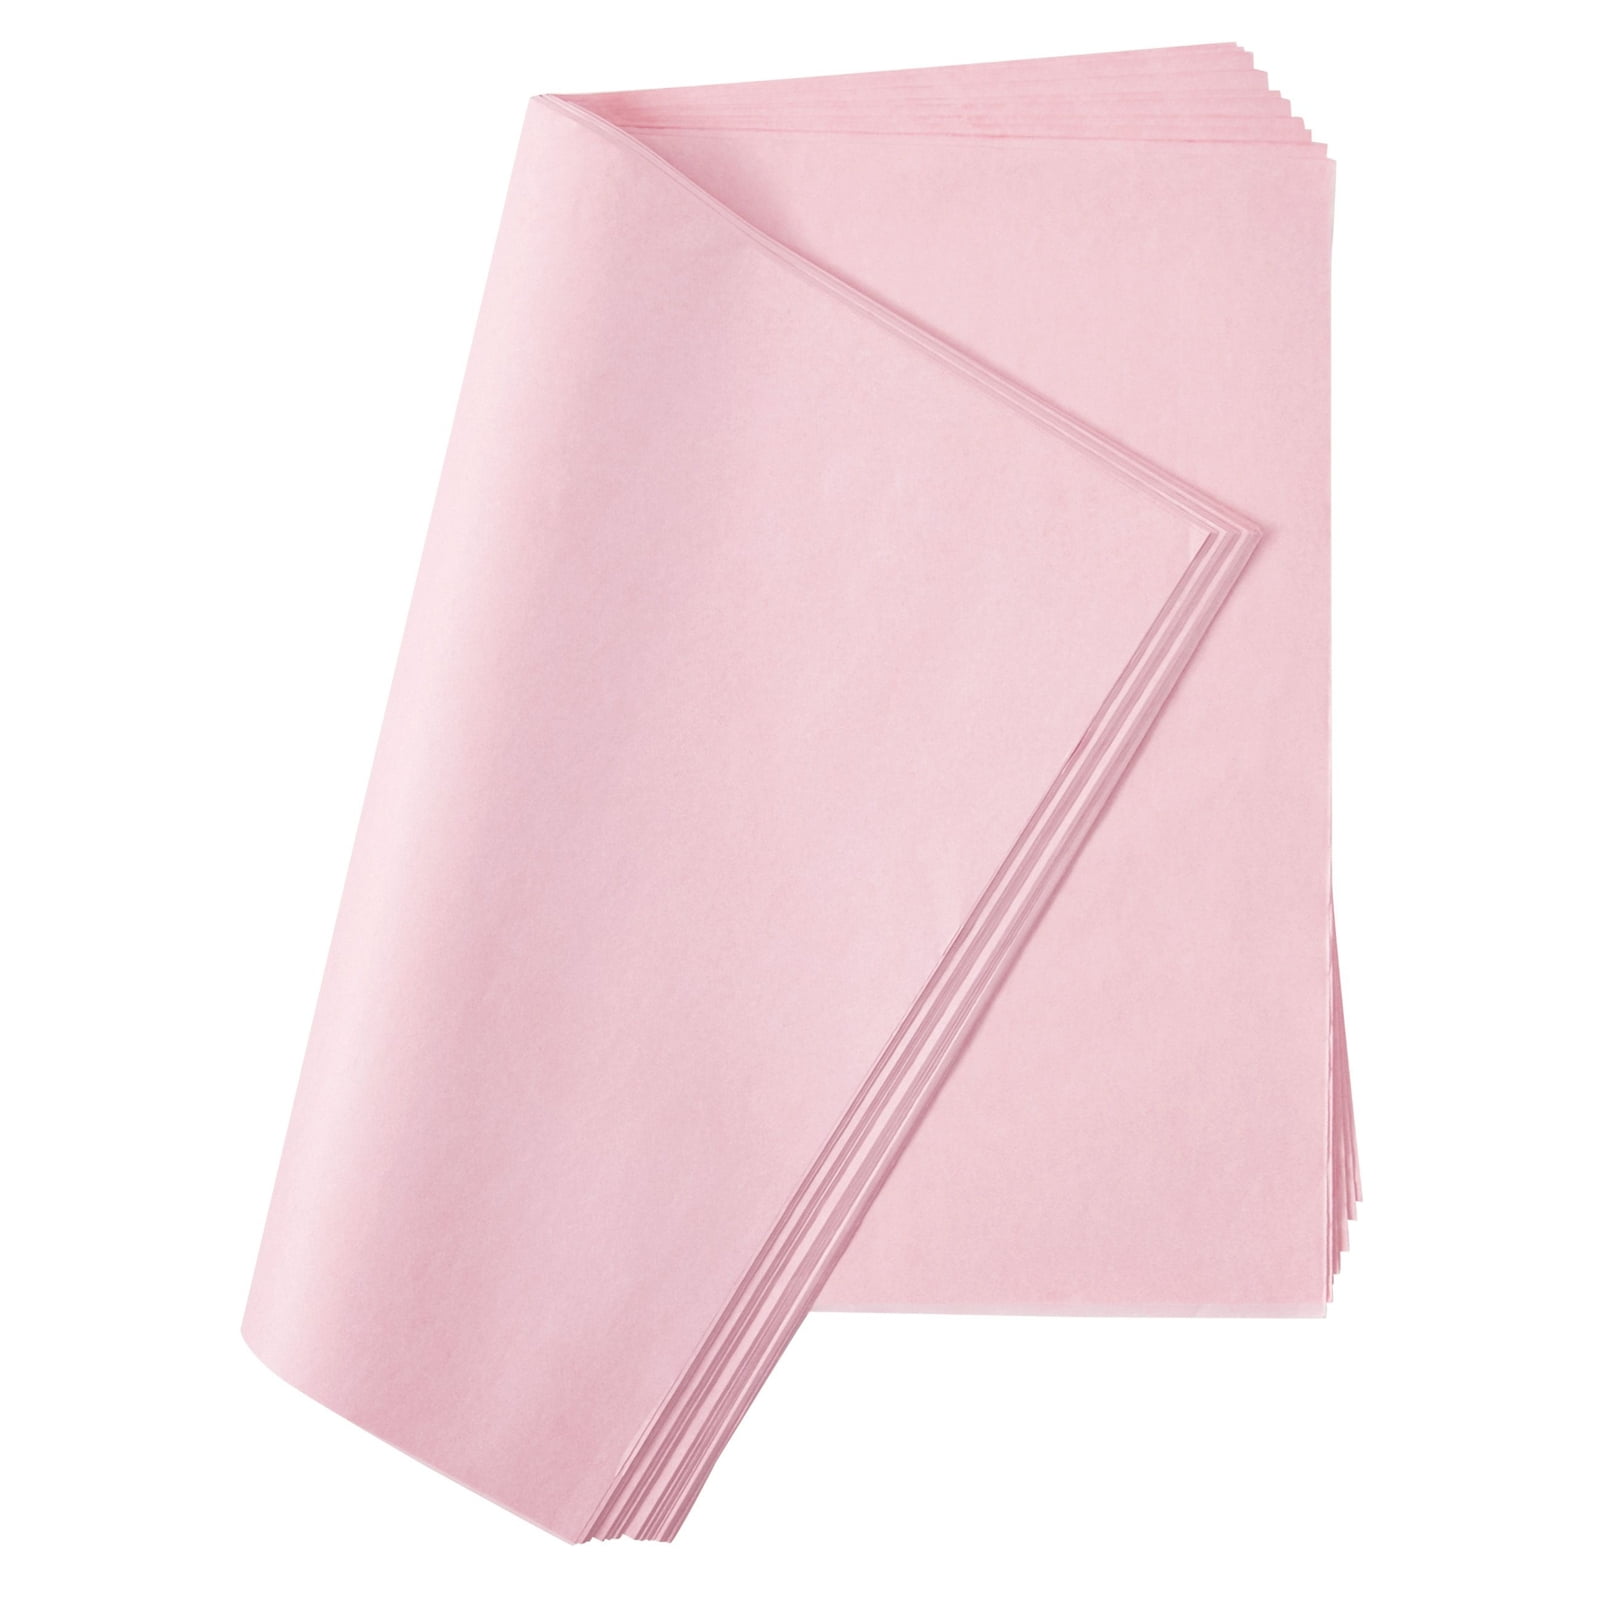 160 Sheets Bulk Tissue Paper for Gift Wrapping Bags, 4 Pink Colors, 15 x 20  In, PACK - Ralphs